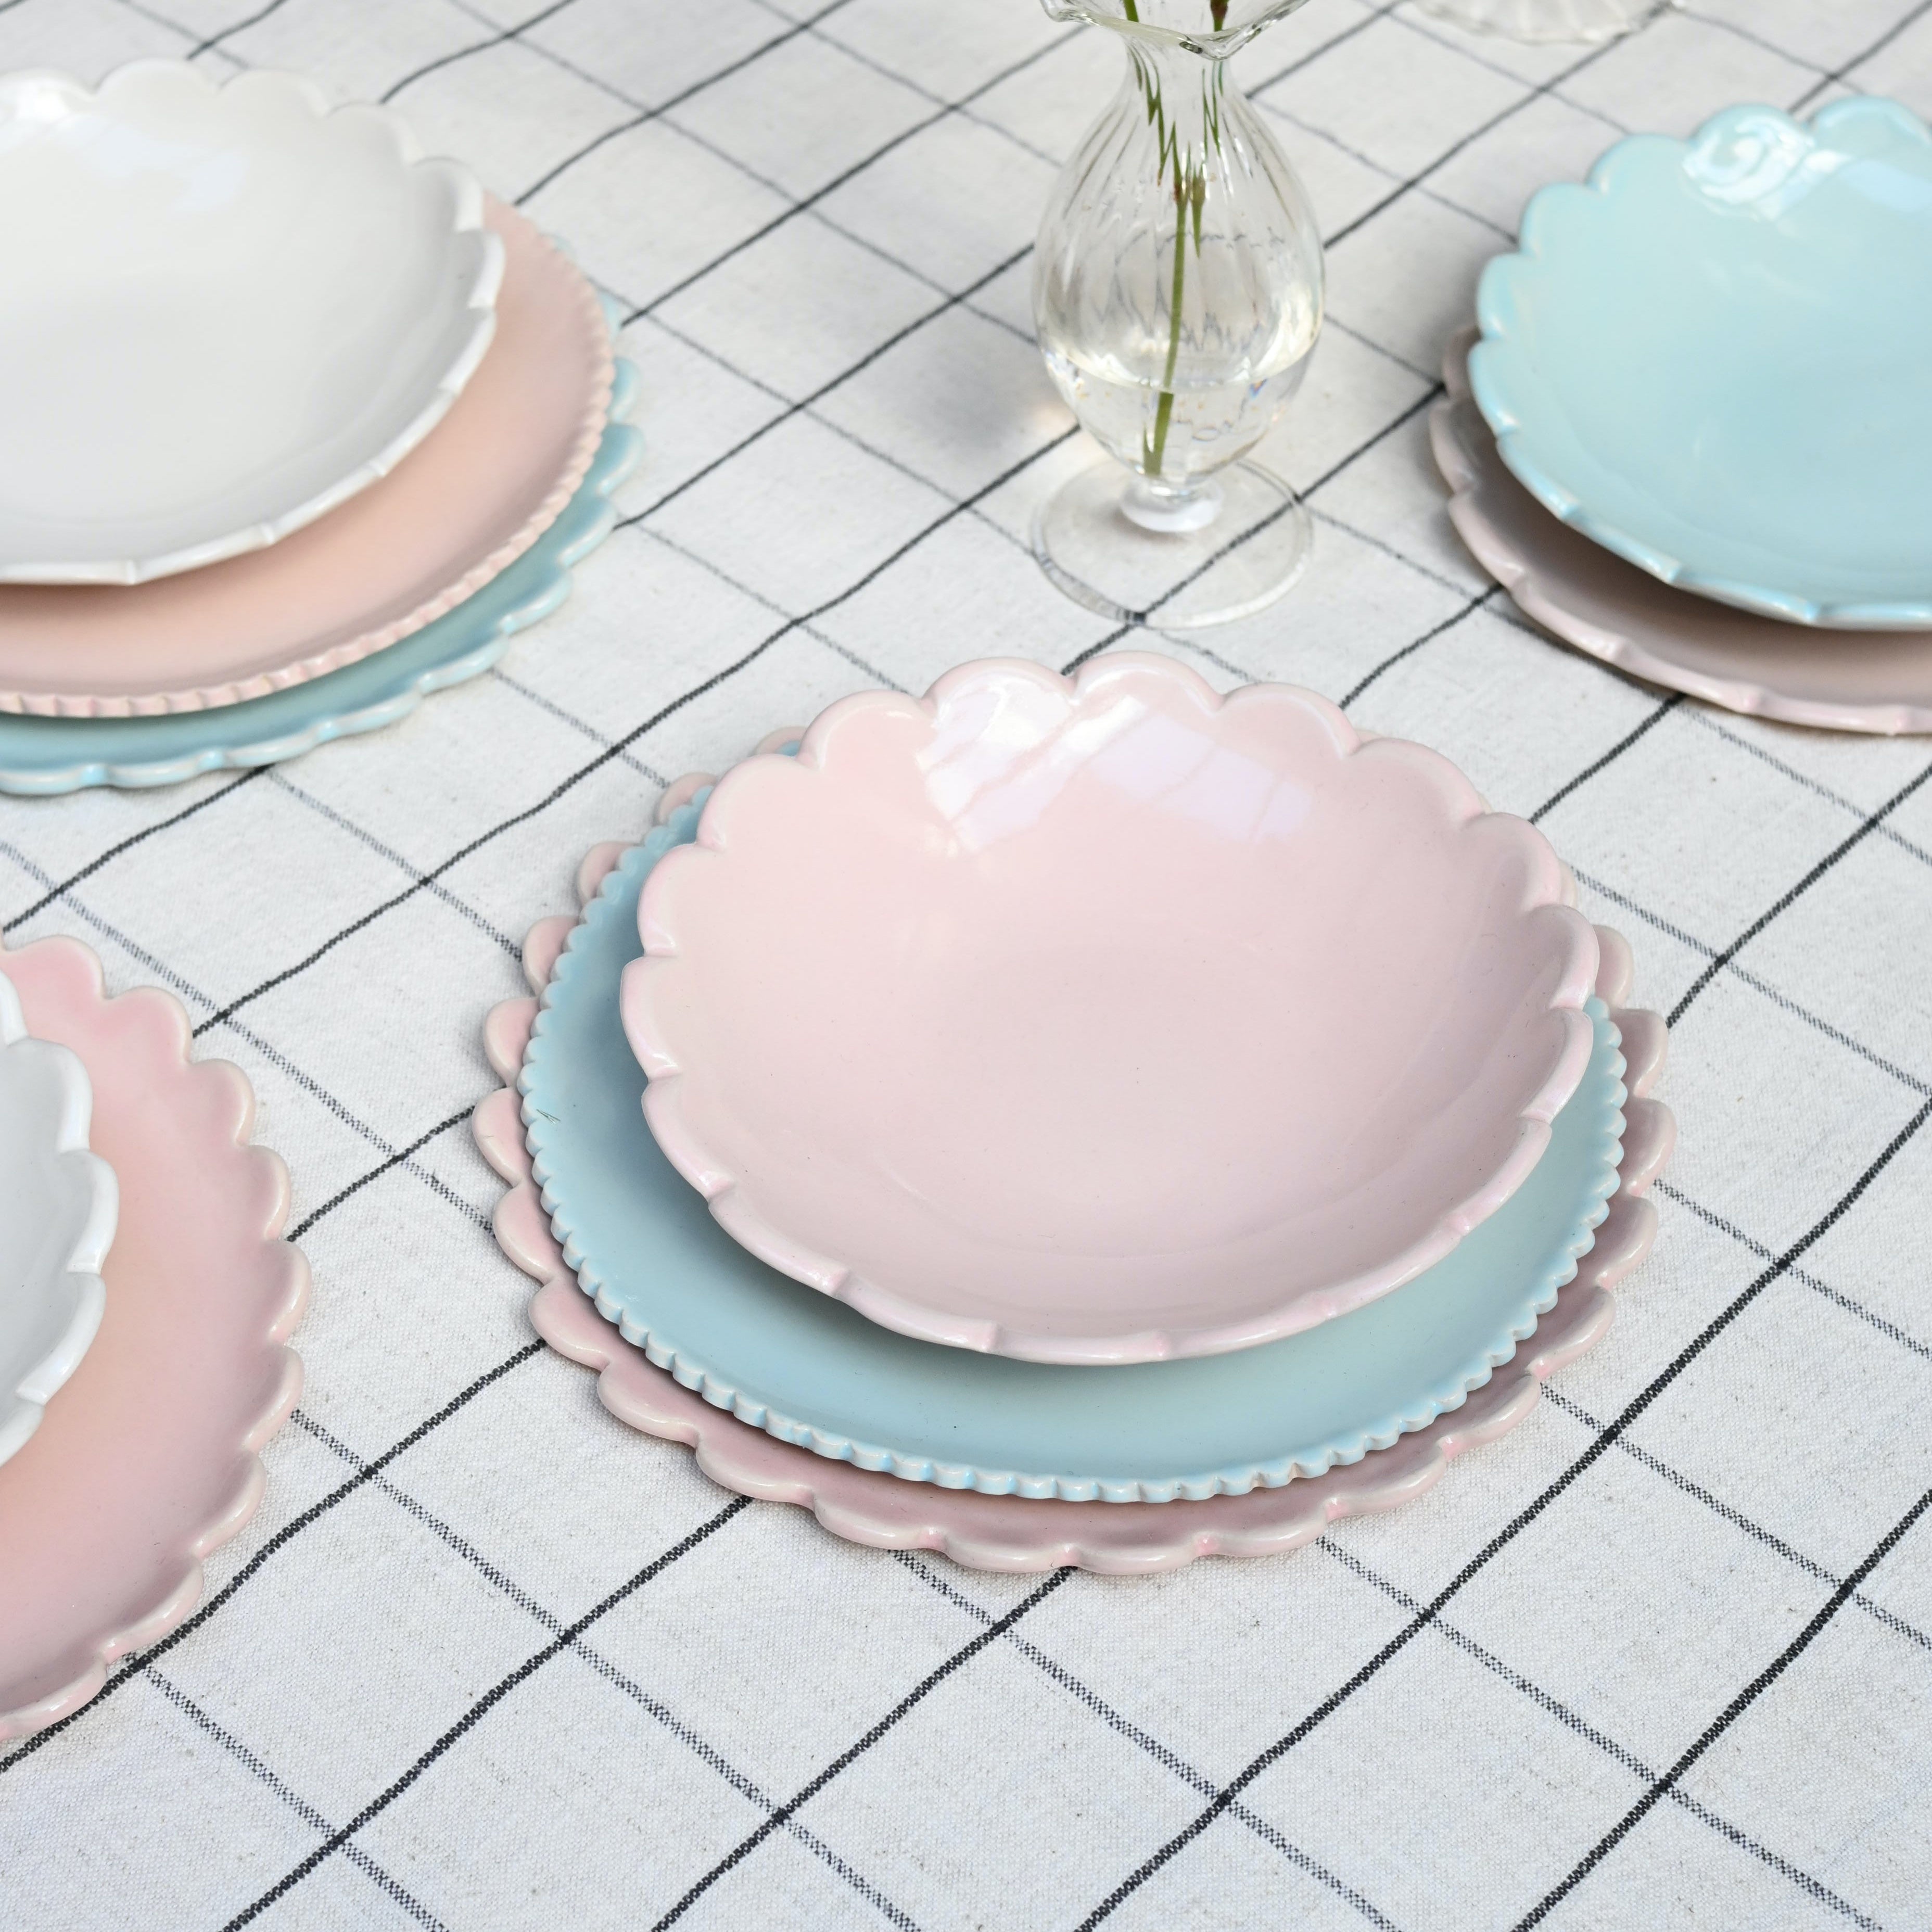 scalloped edge ice cream bowls in pink white and blue